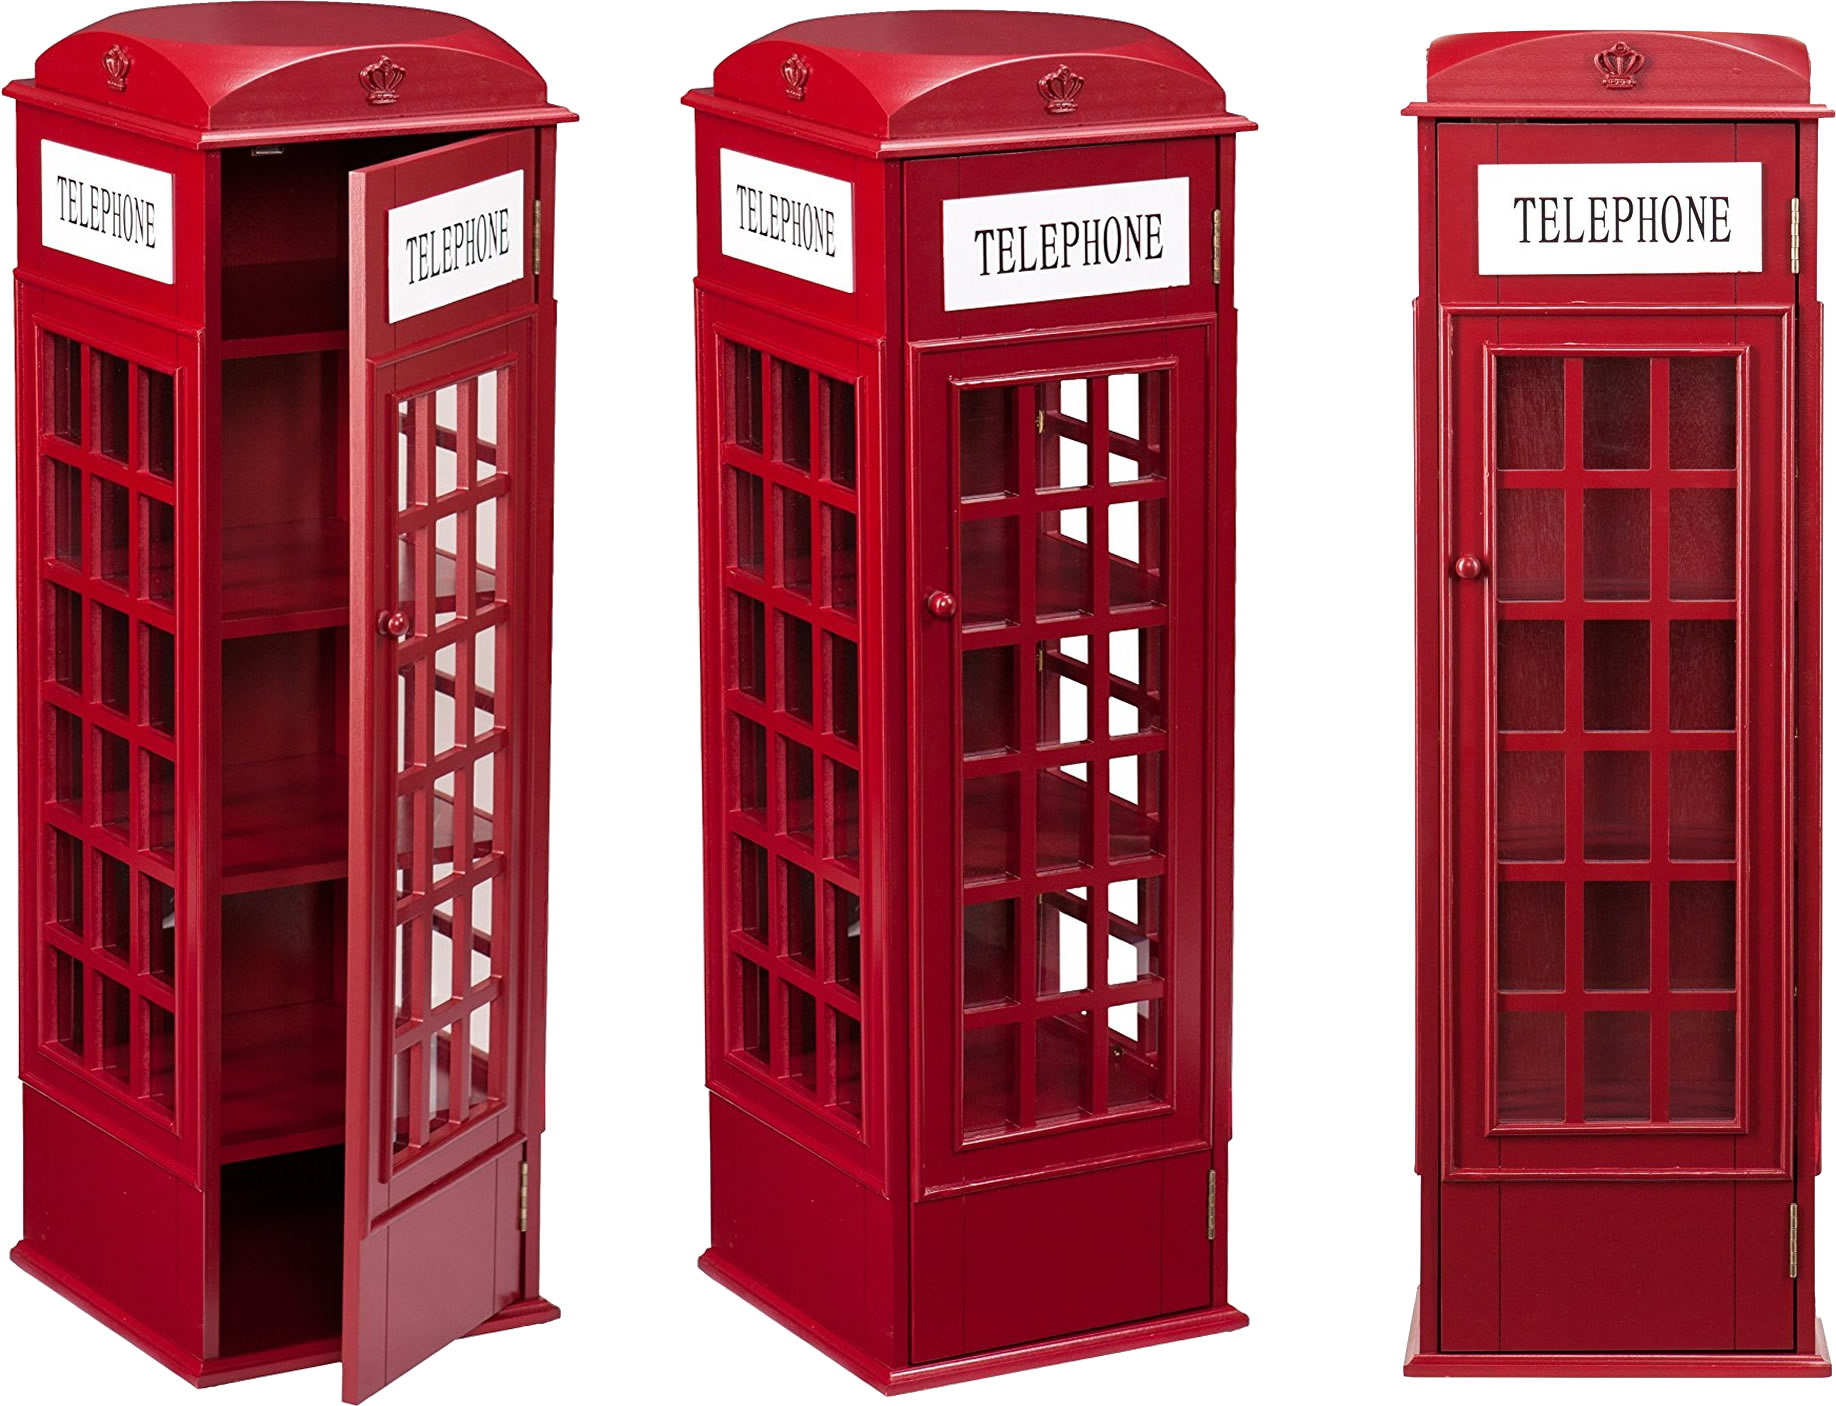 Details about   Red WALL CURIO CABINET British Telephone Booth Display Case Glass Doors Shelves 